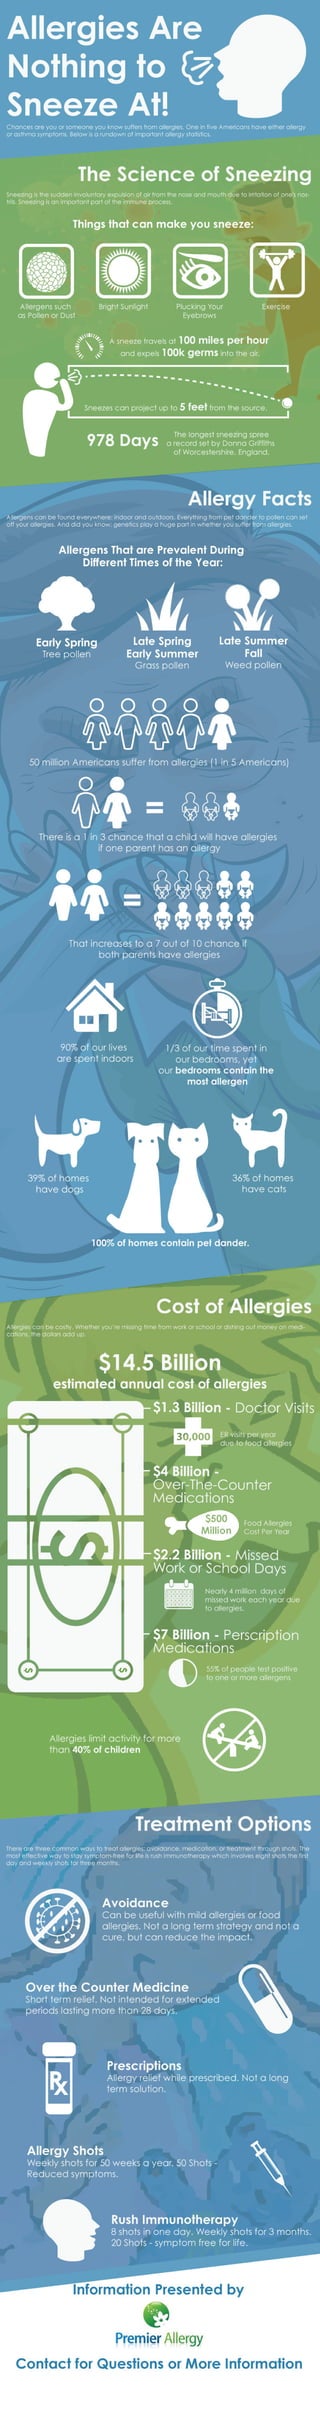 Allergy infographic - Dr Summit Shah